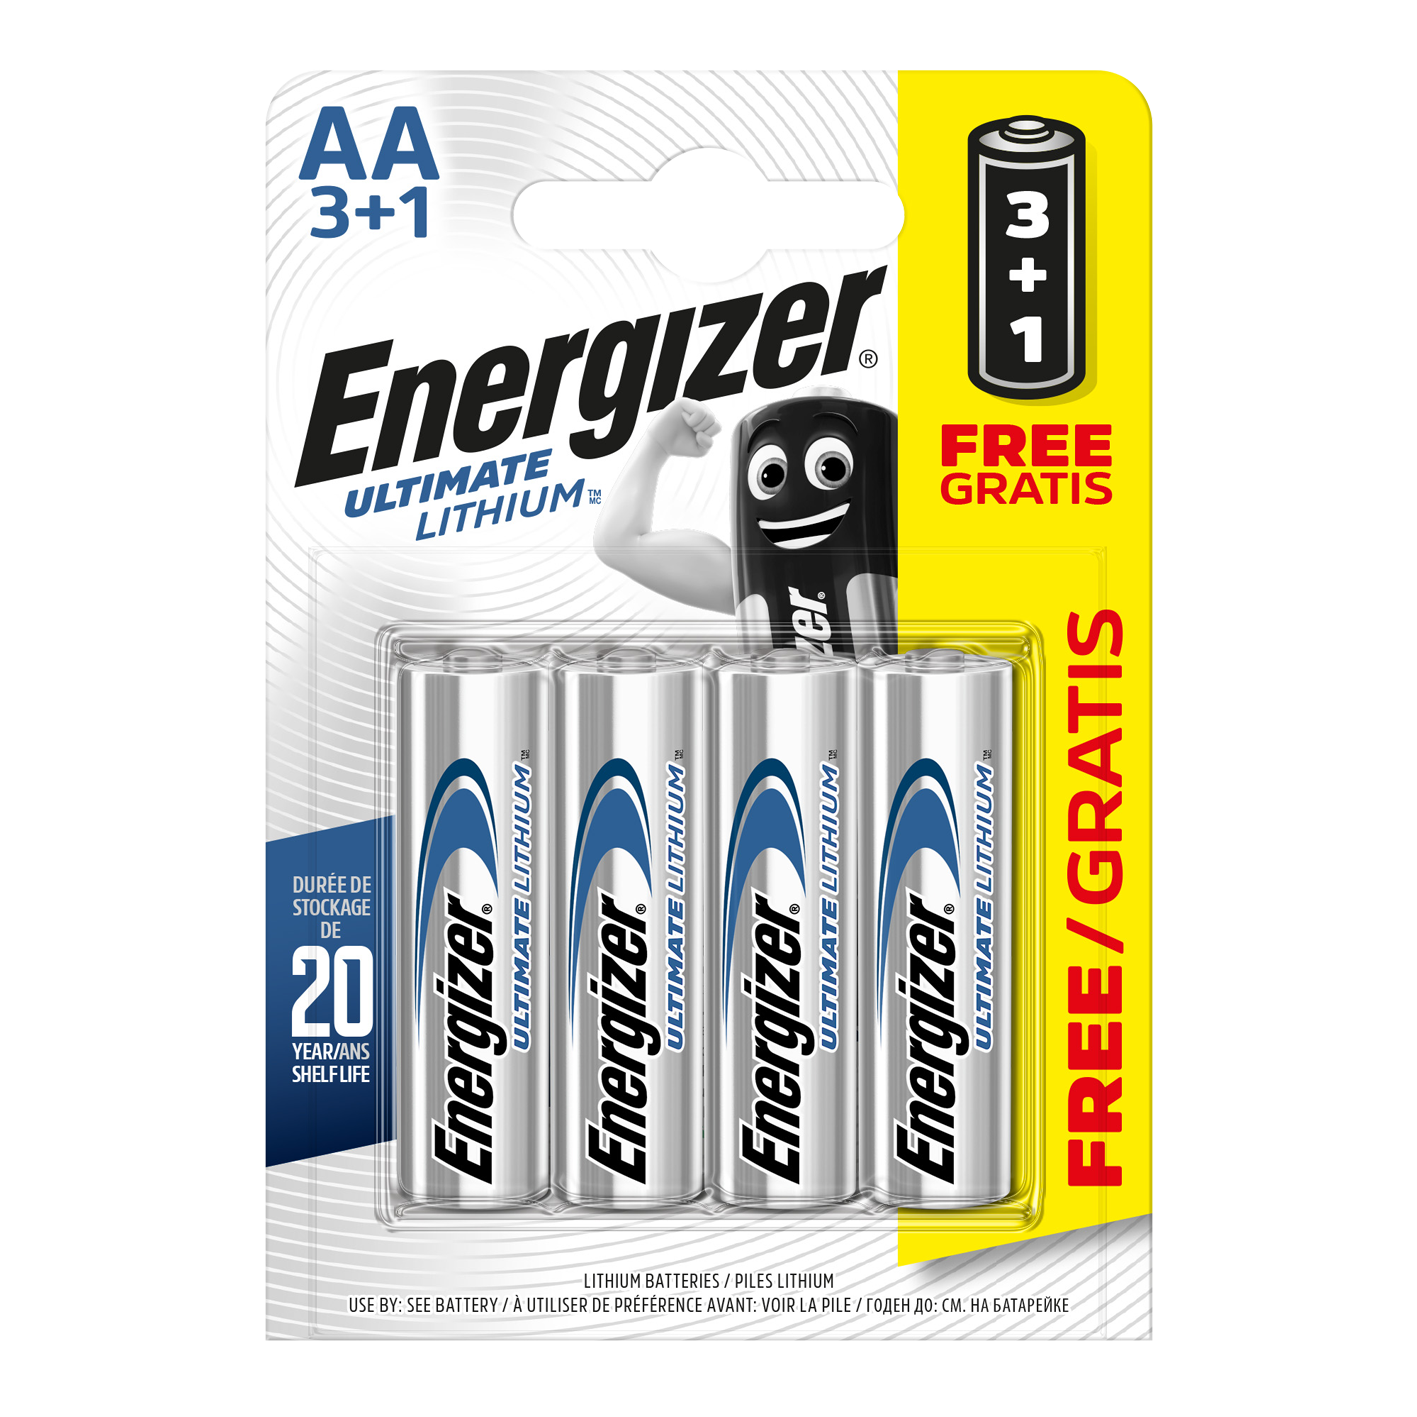  Energizer Ultimate Lithium AA Size Batteries - 20 Pack : Health  & Household